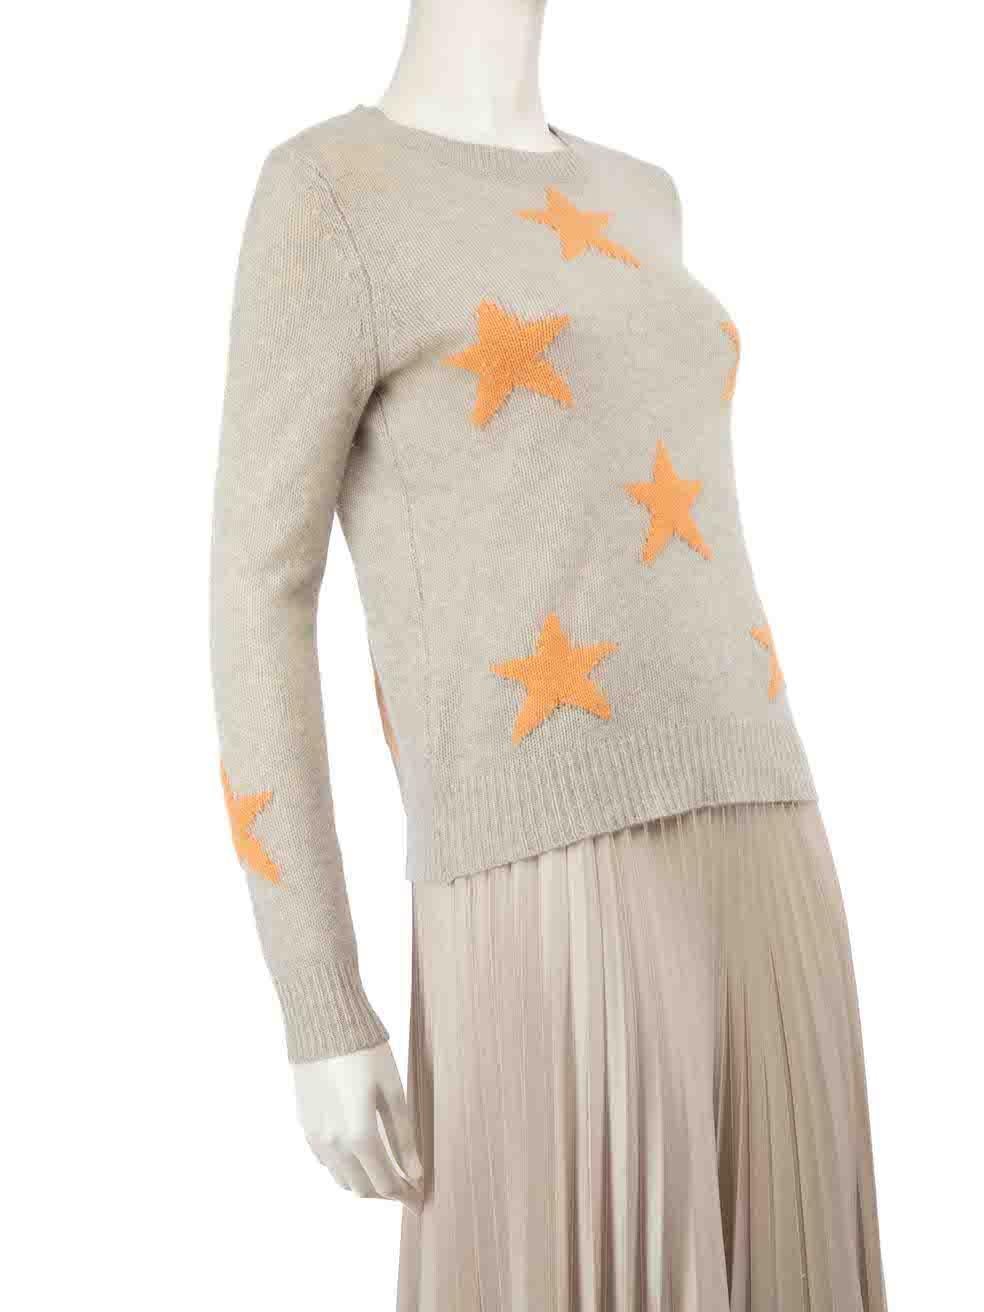 CONDITION is Very good. Minimal wear to jumper is evident. Minimal pilling to overall material on this used 360 Cashmere designer resale item.
 
 
 
 Details
 
 
 Grey
 
 Cashmere
 
 Knit jumper
 
 Star pattern
 
 Long sleeves
 
 Round neck
 
 
 
 
